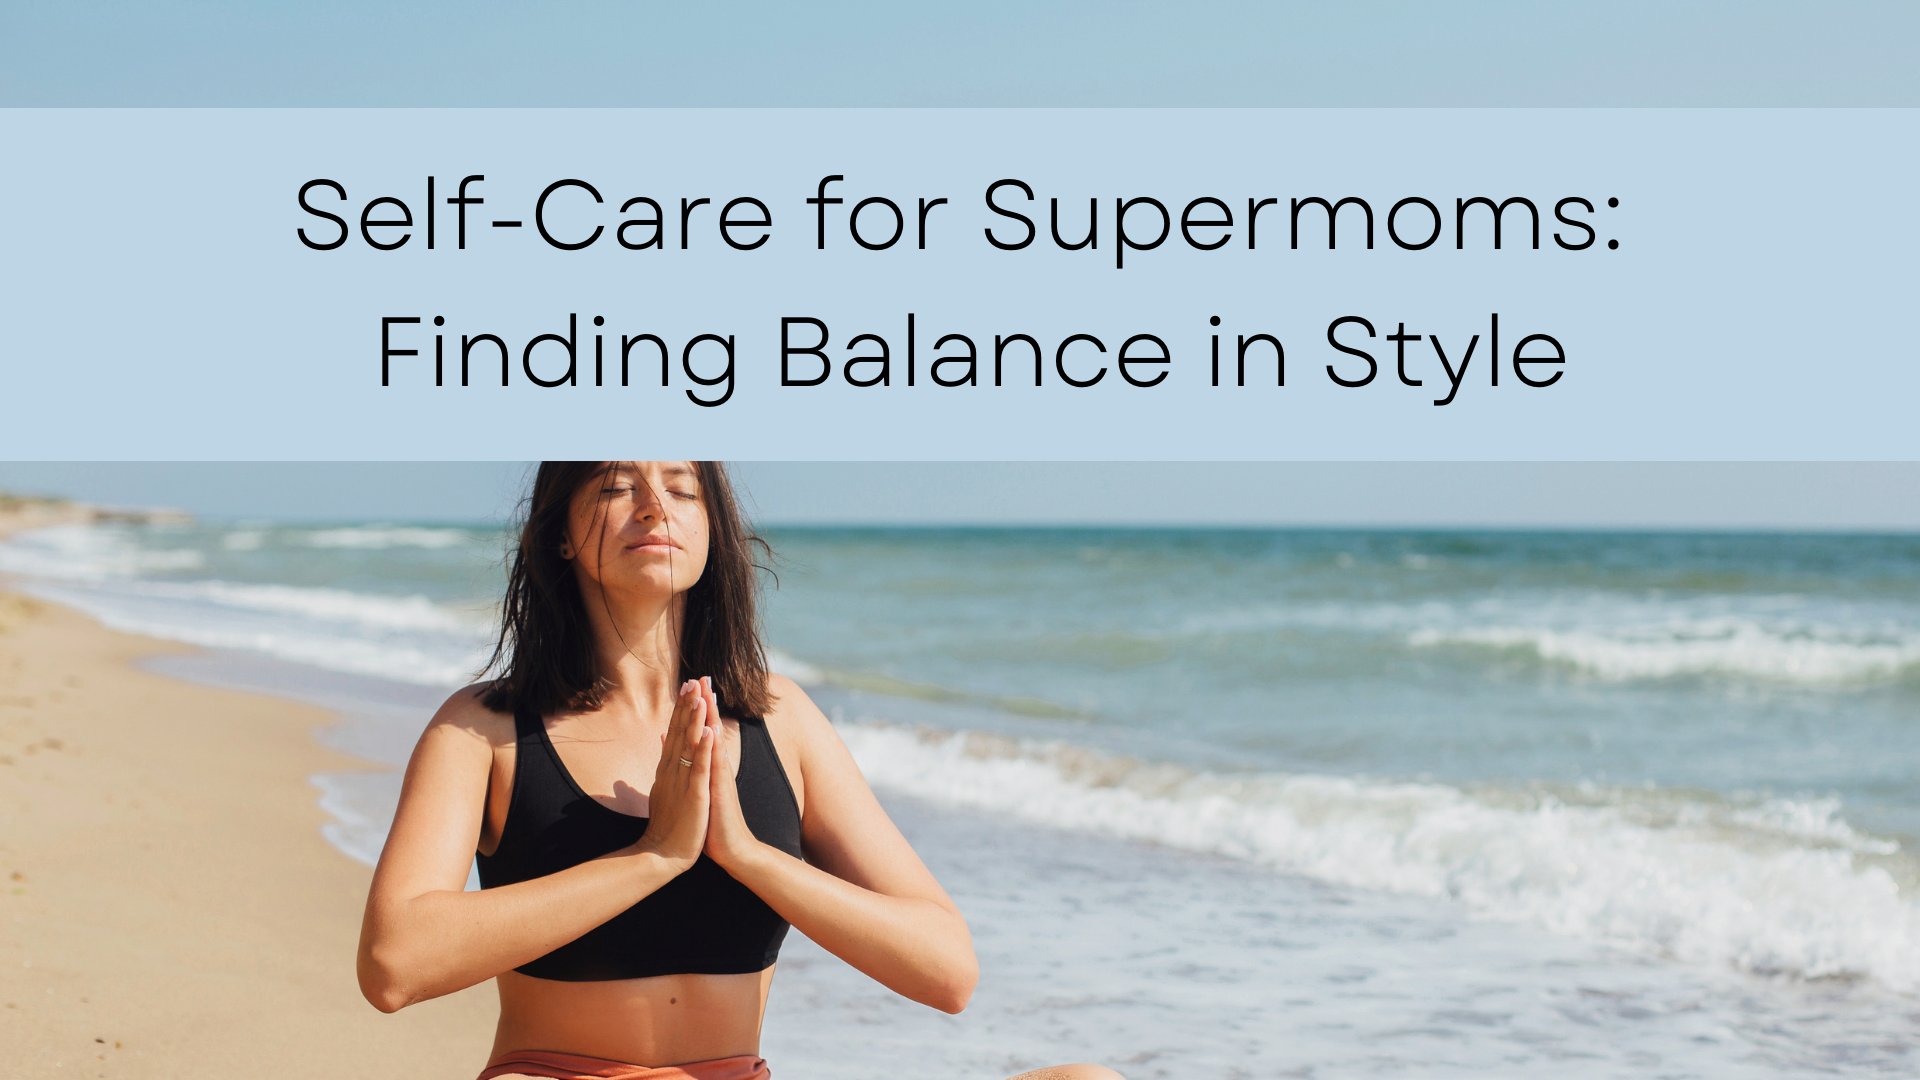 Self-Care for Supermoms: Finding Balance in Style